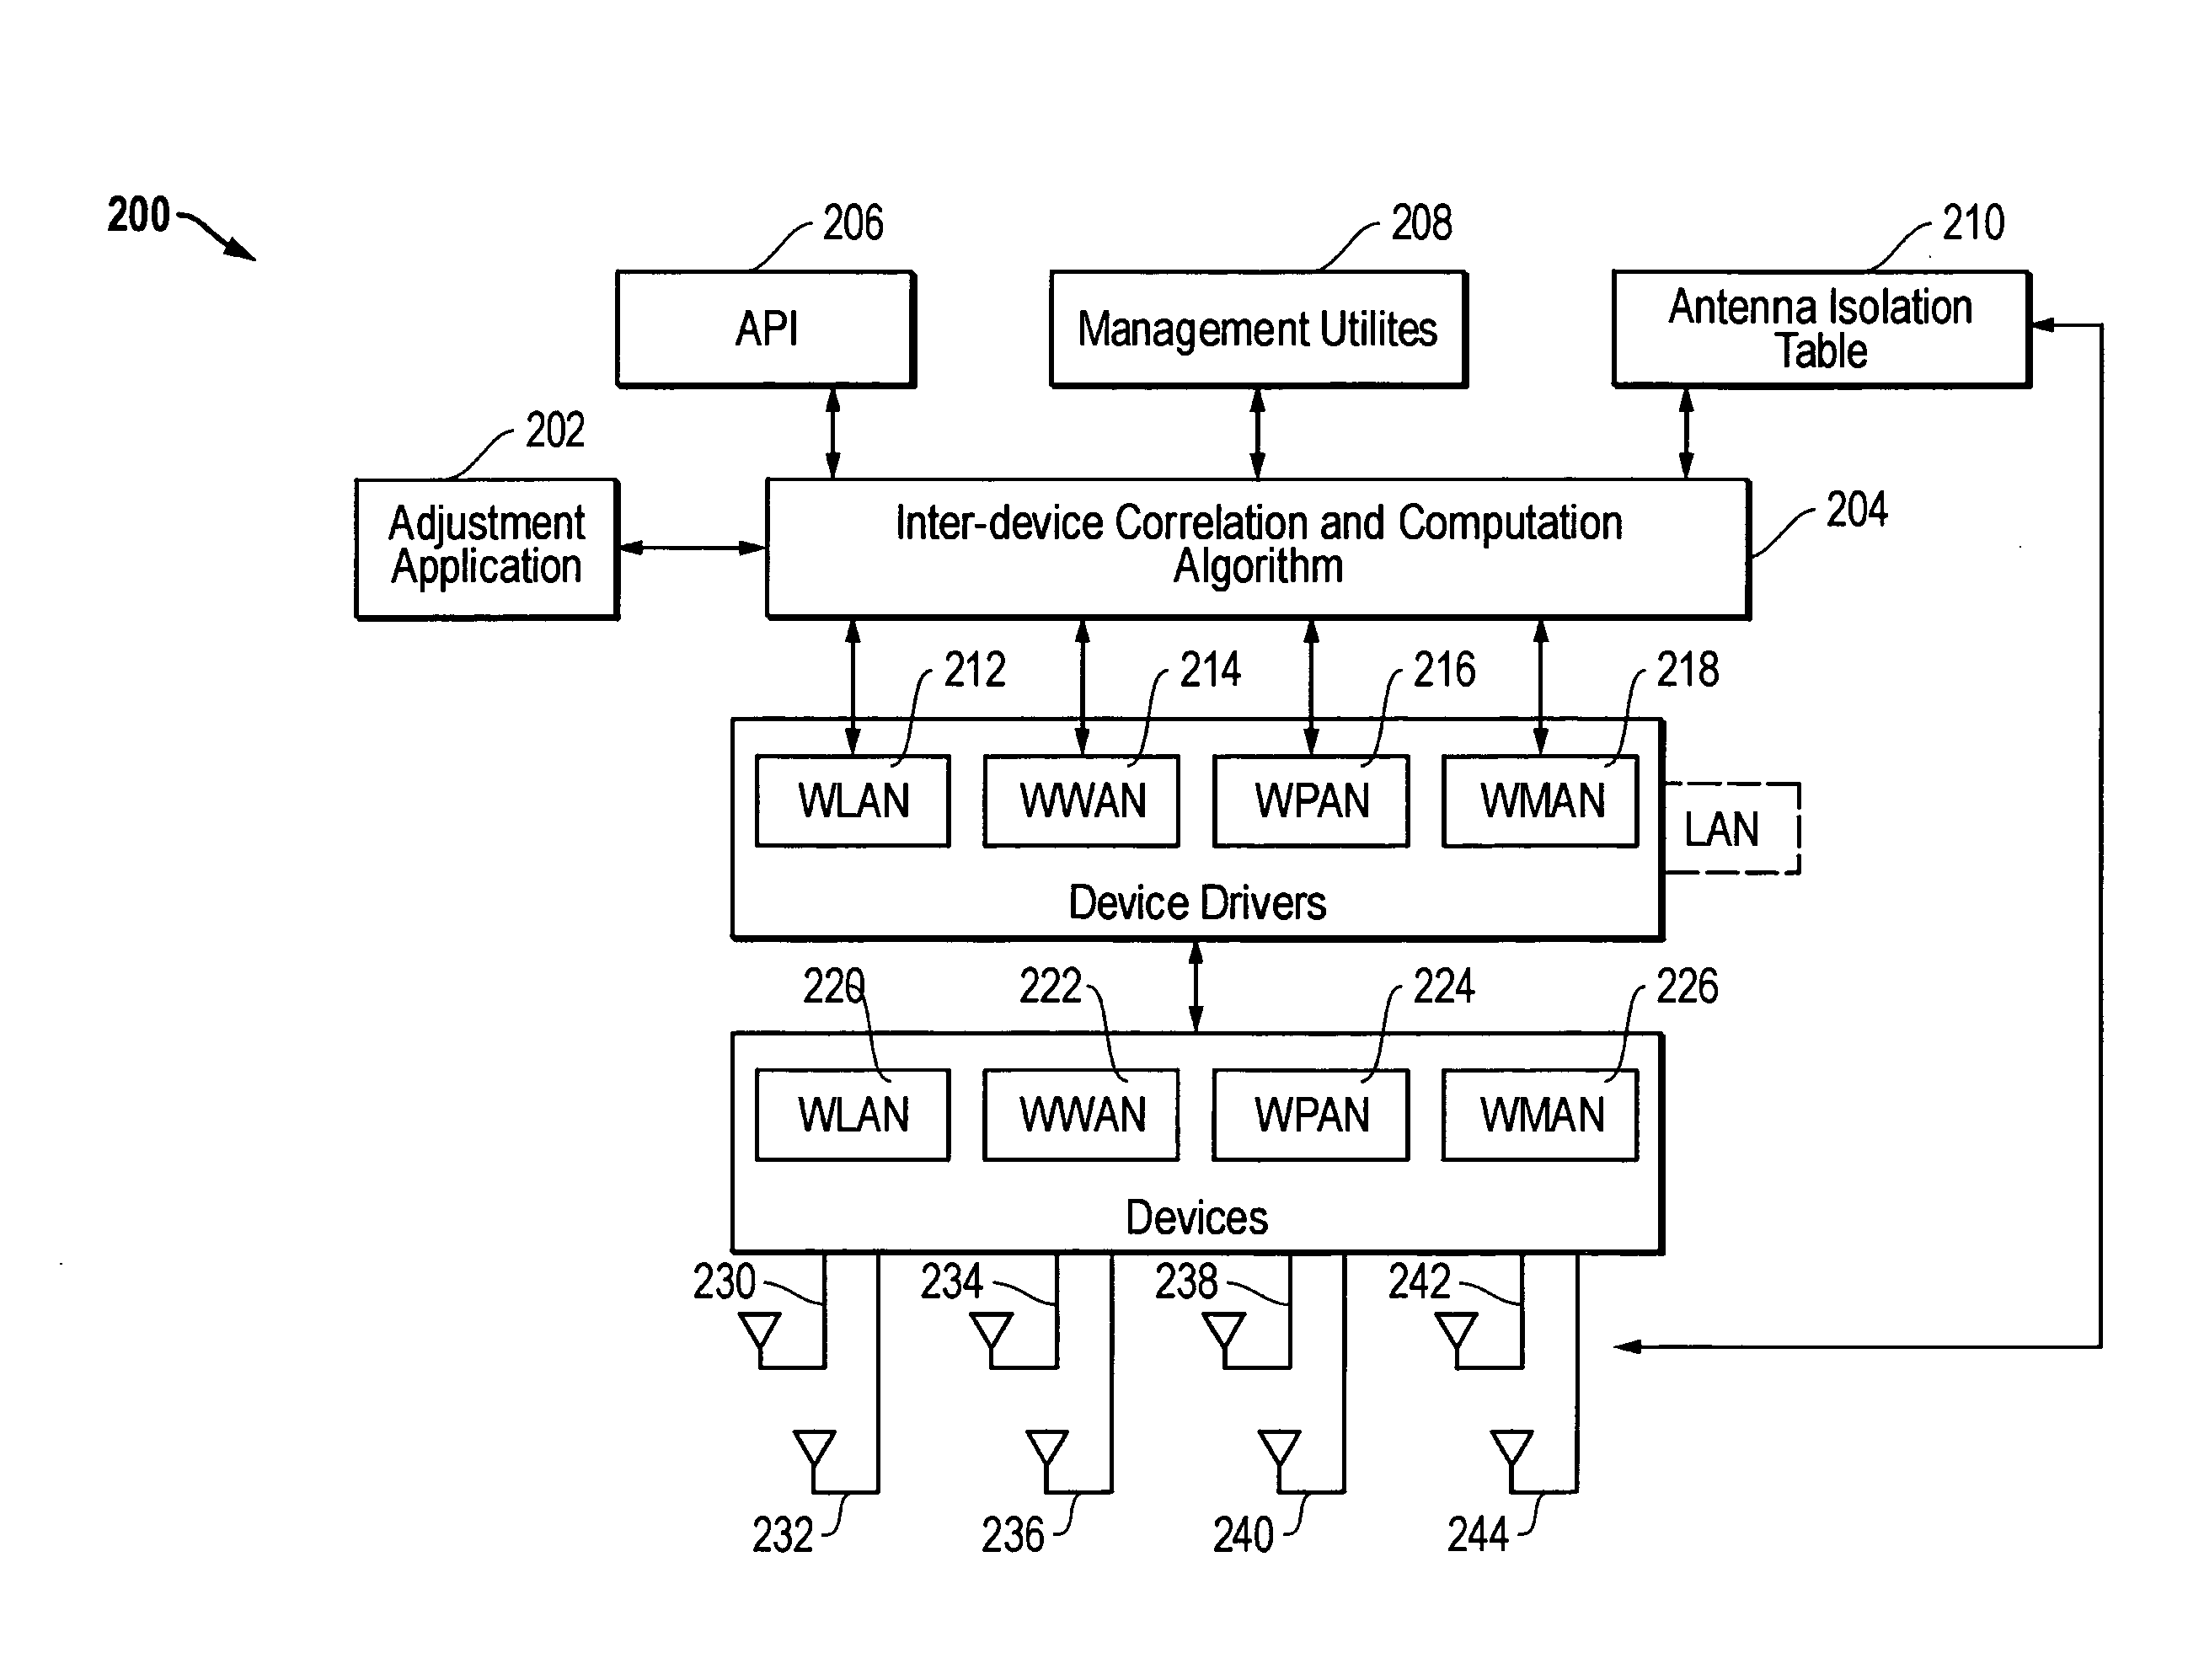 Method for selecting a priority for wireless technologies via graphical representation